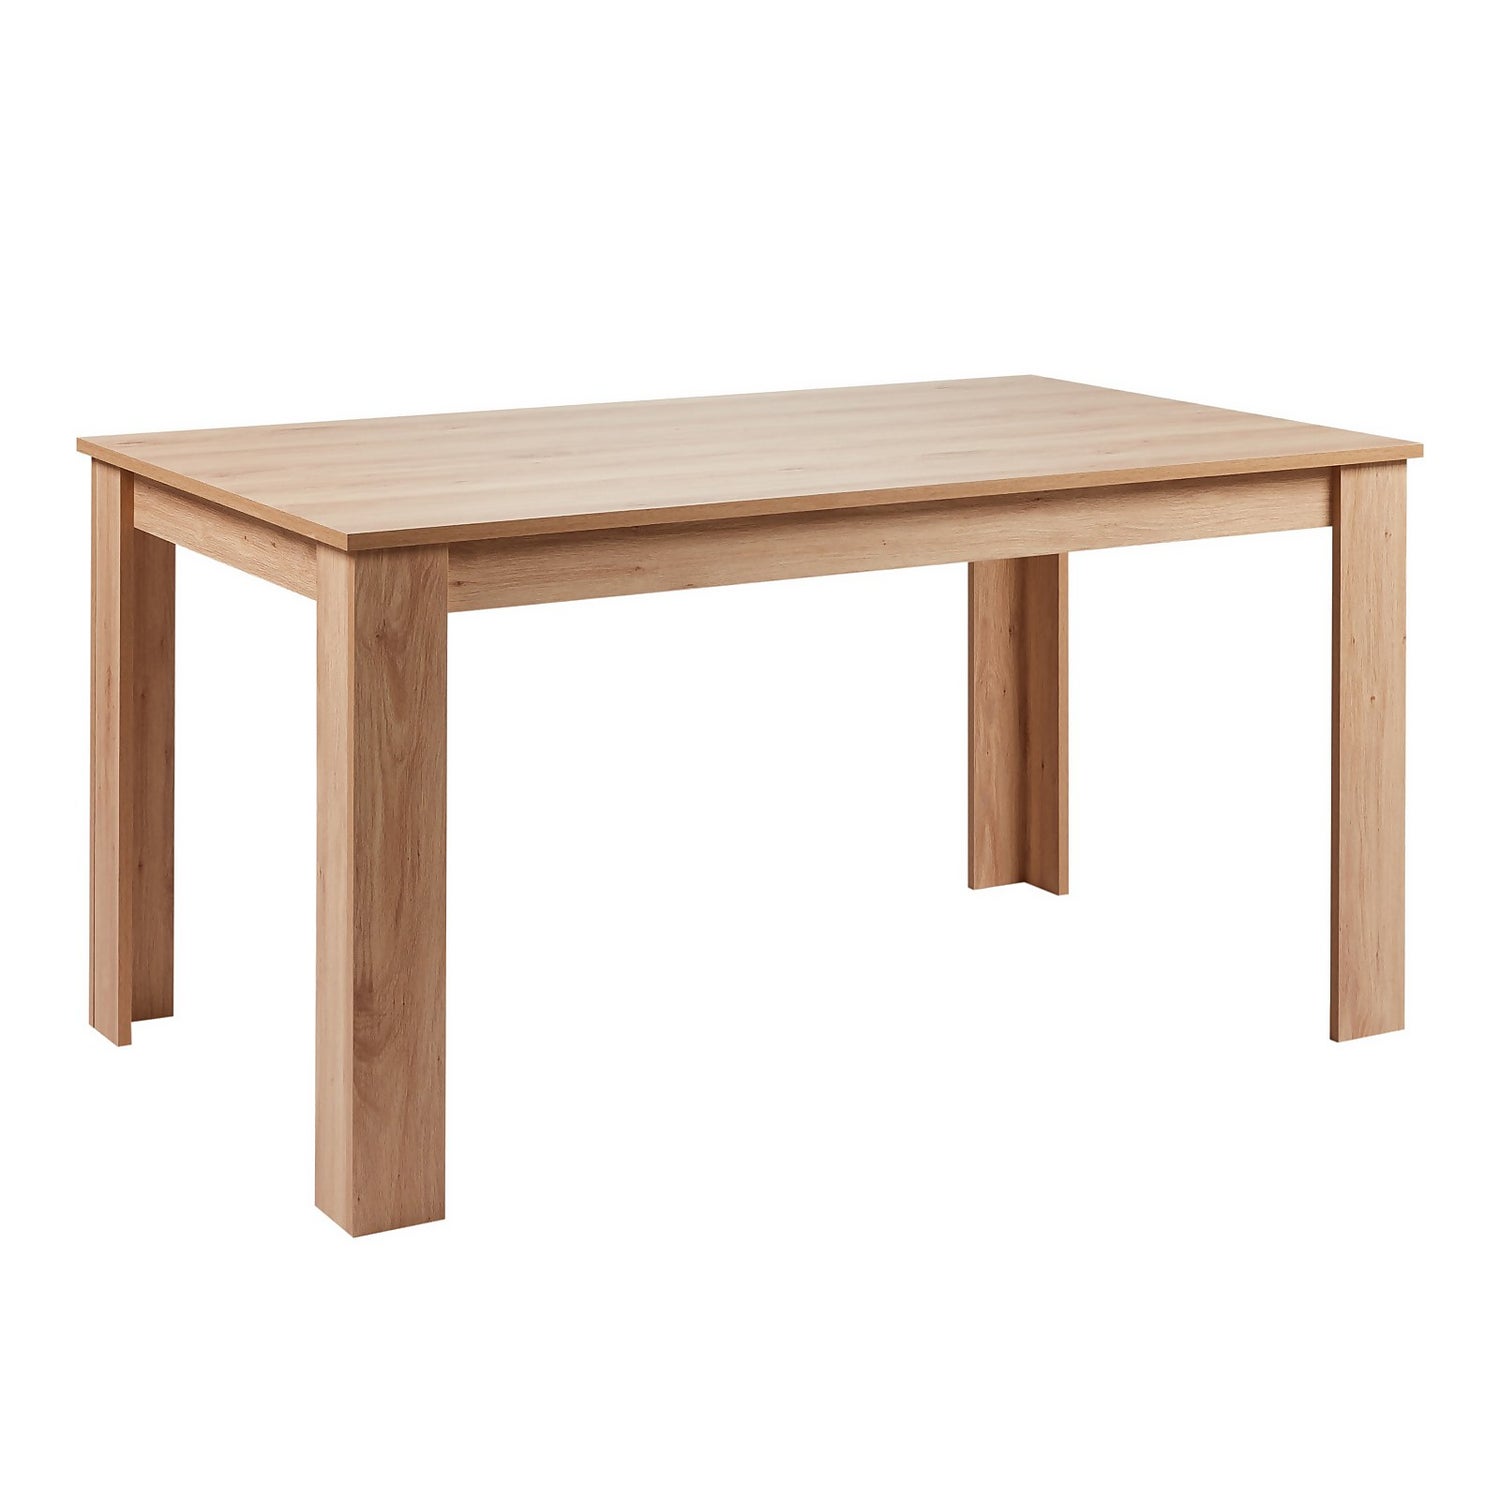 Marcy Dining Table - Oak | Homebase